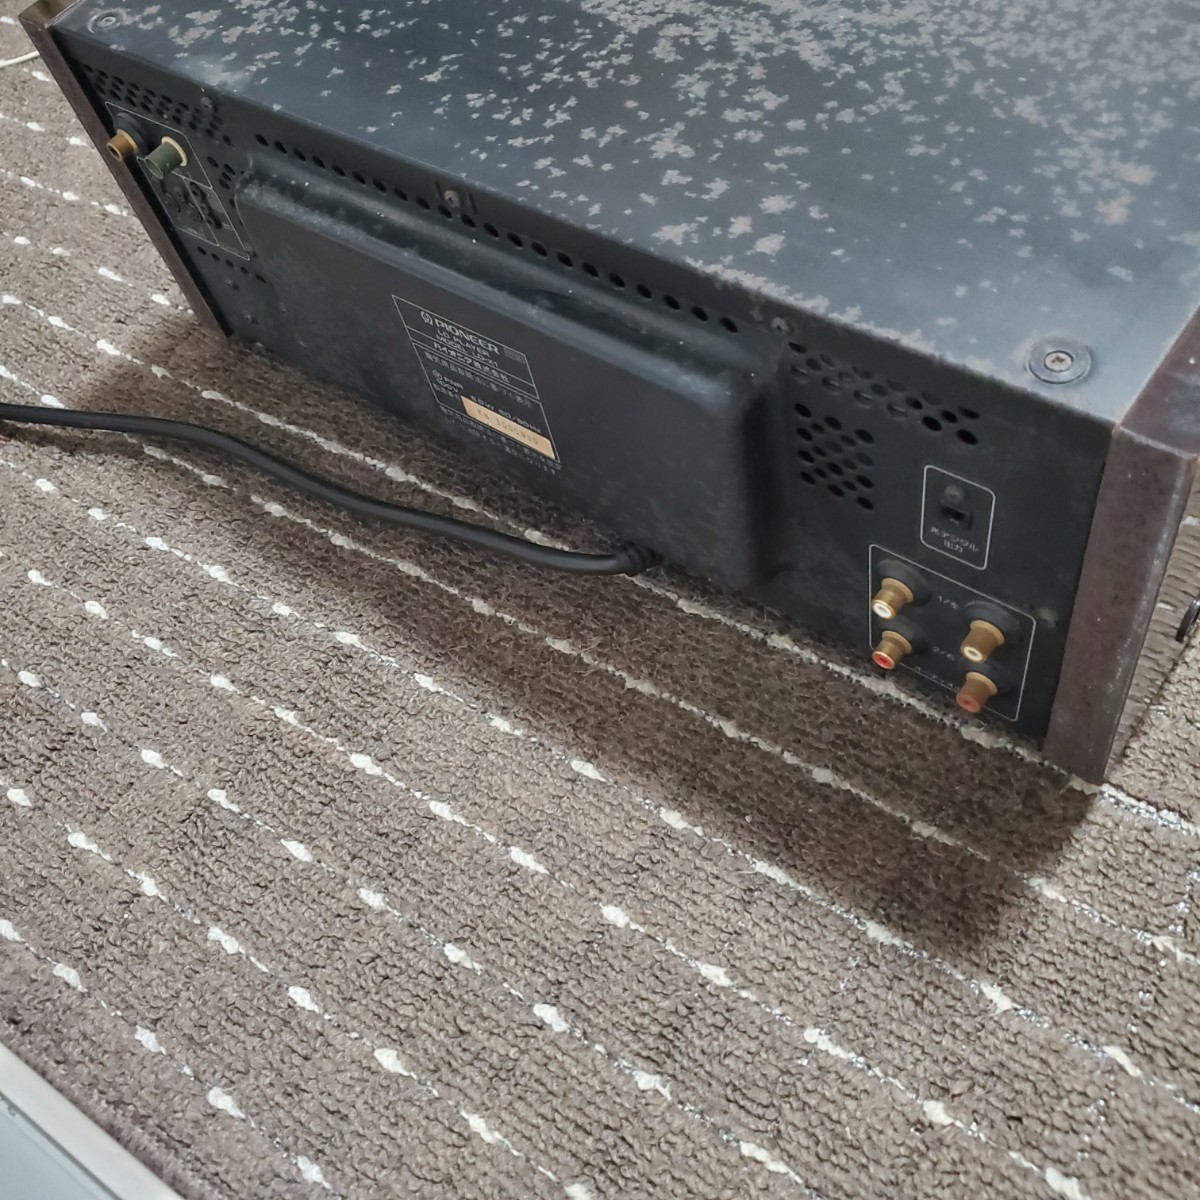  prompt decision PIONEER LD-X1 laser disk player Junk 